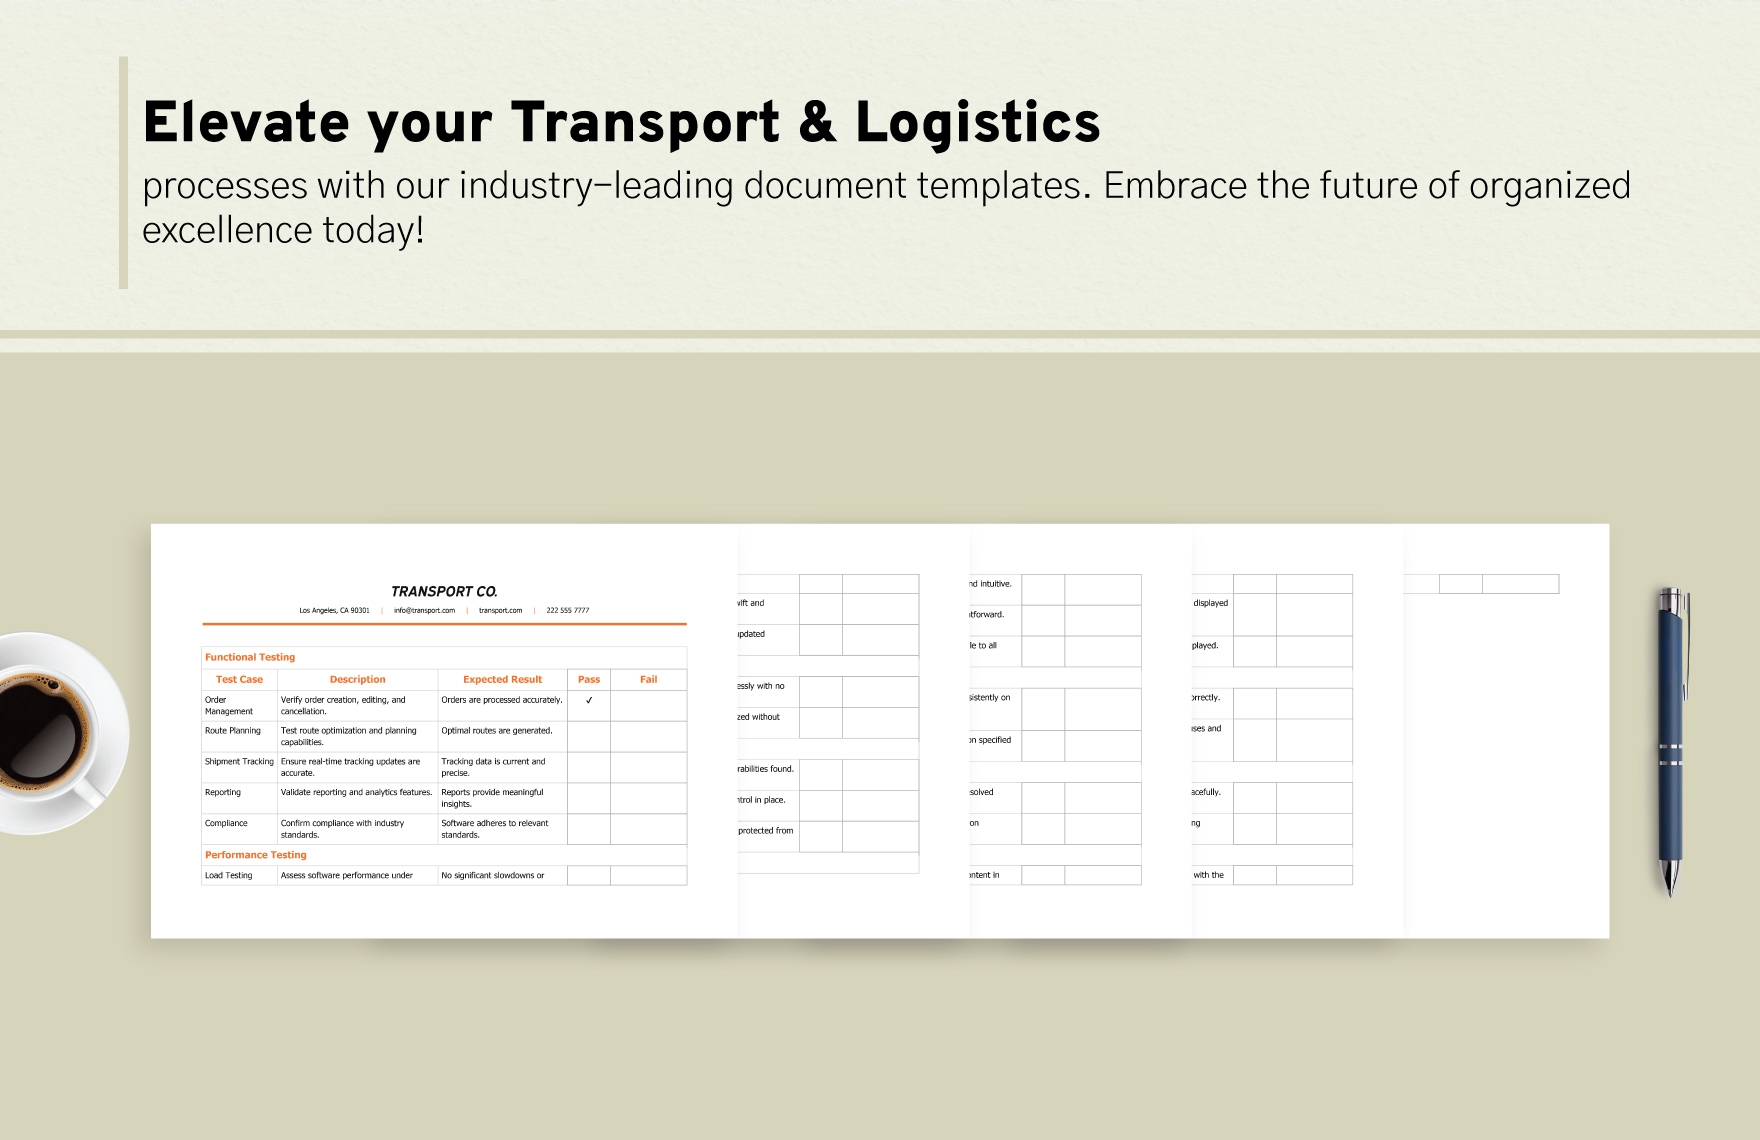 Transport and Logistics Software Testing Checklist Template